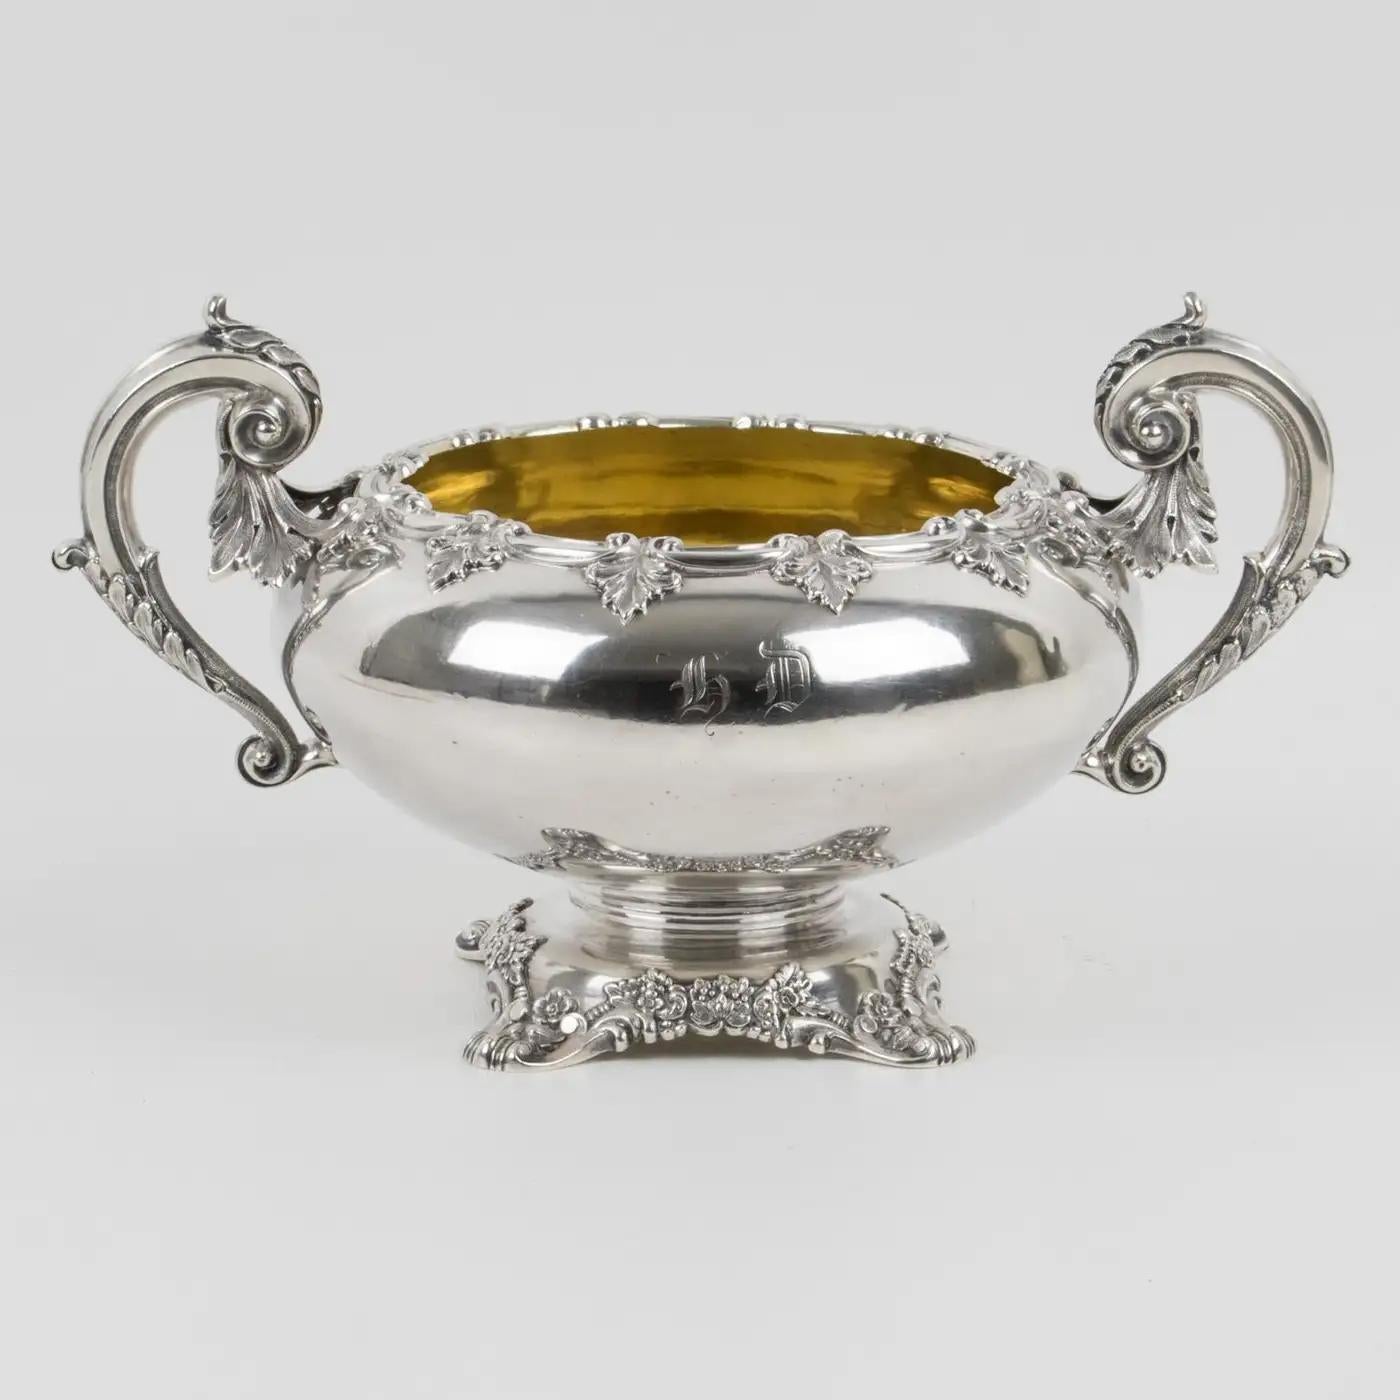 Gustave Odiot Paris 19th Century Sterling Silver Decorative Bowl For Sale 4